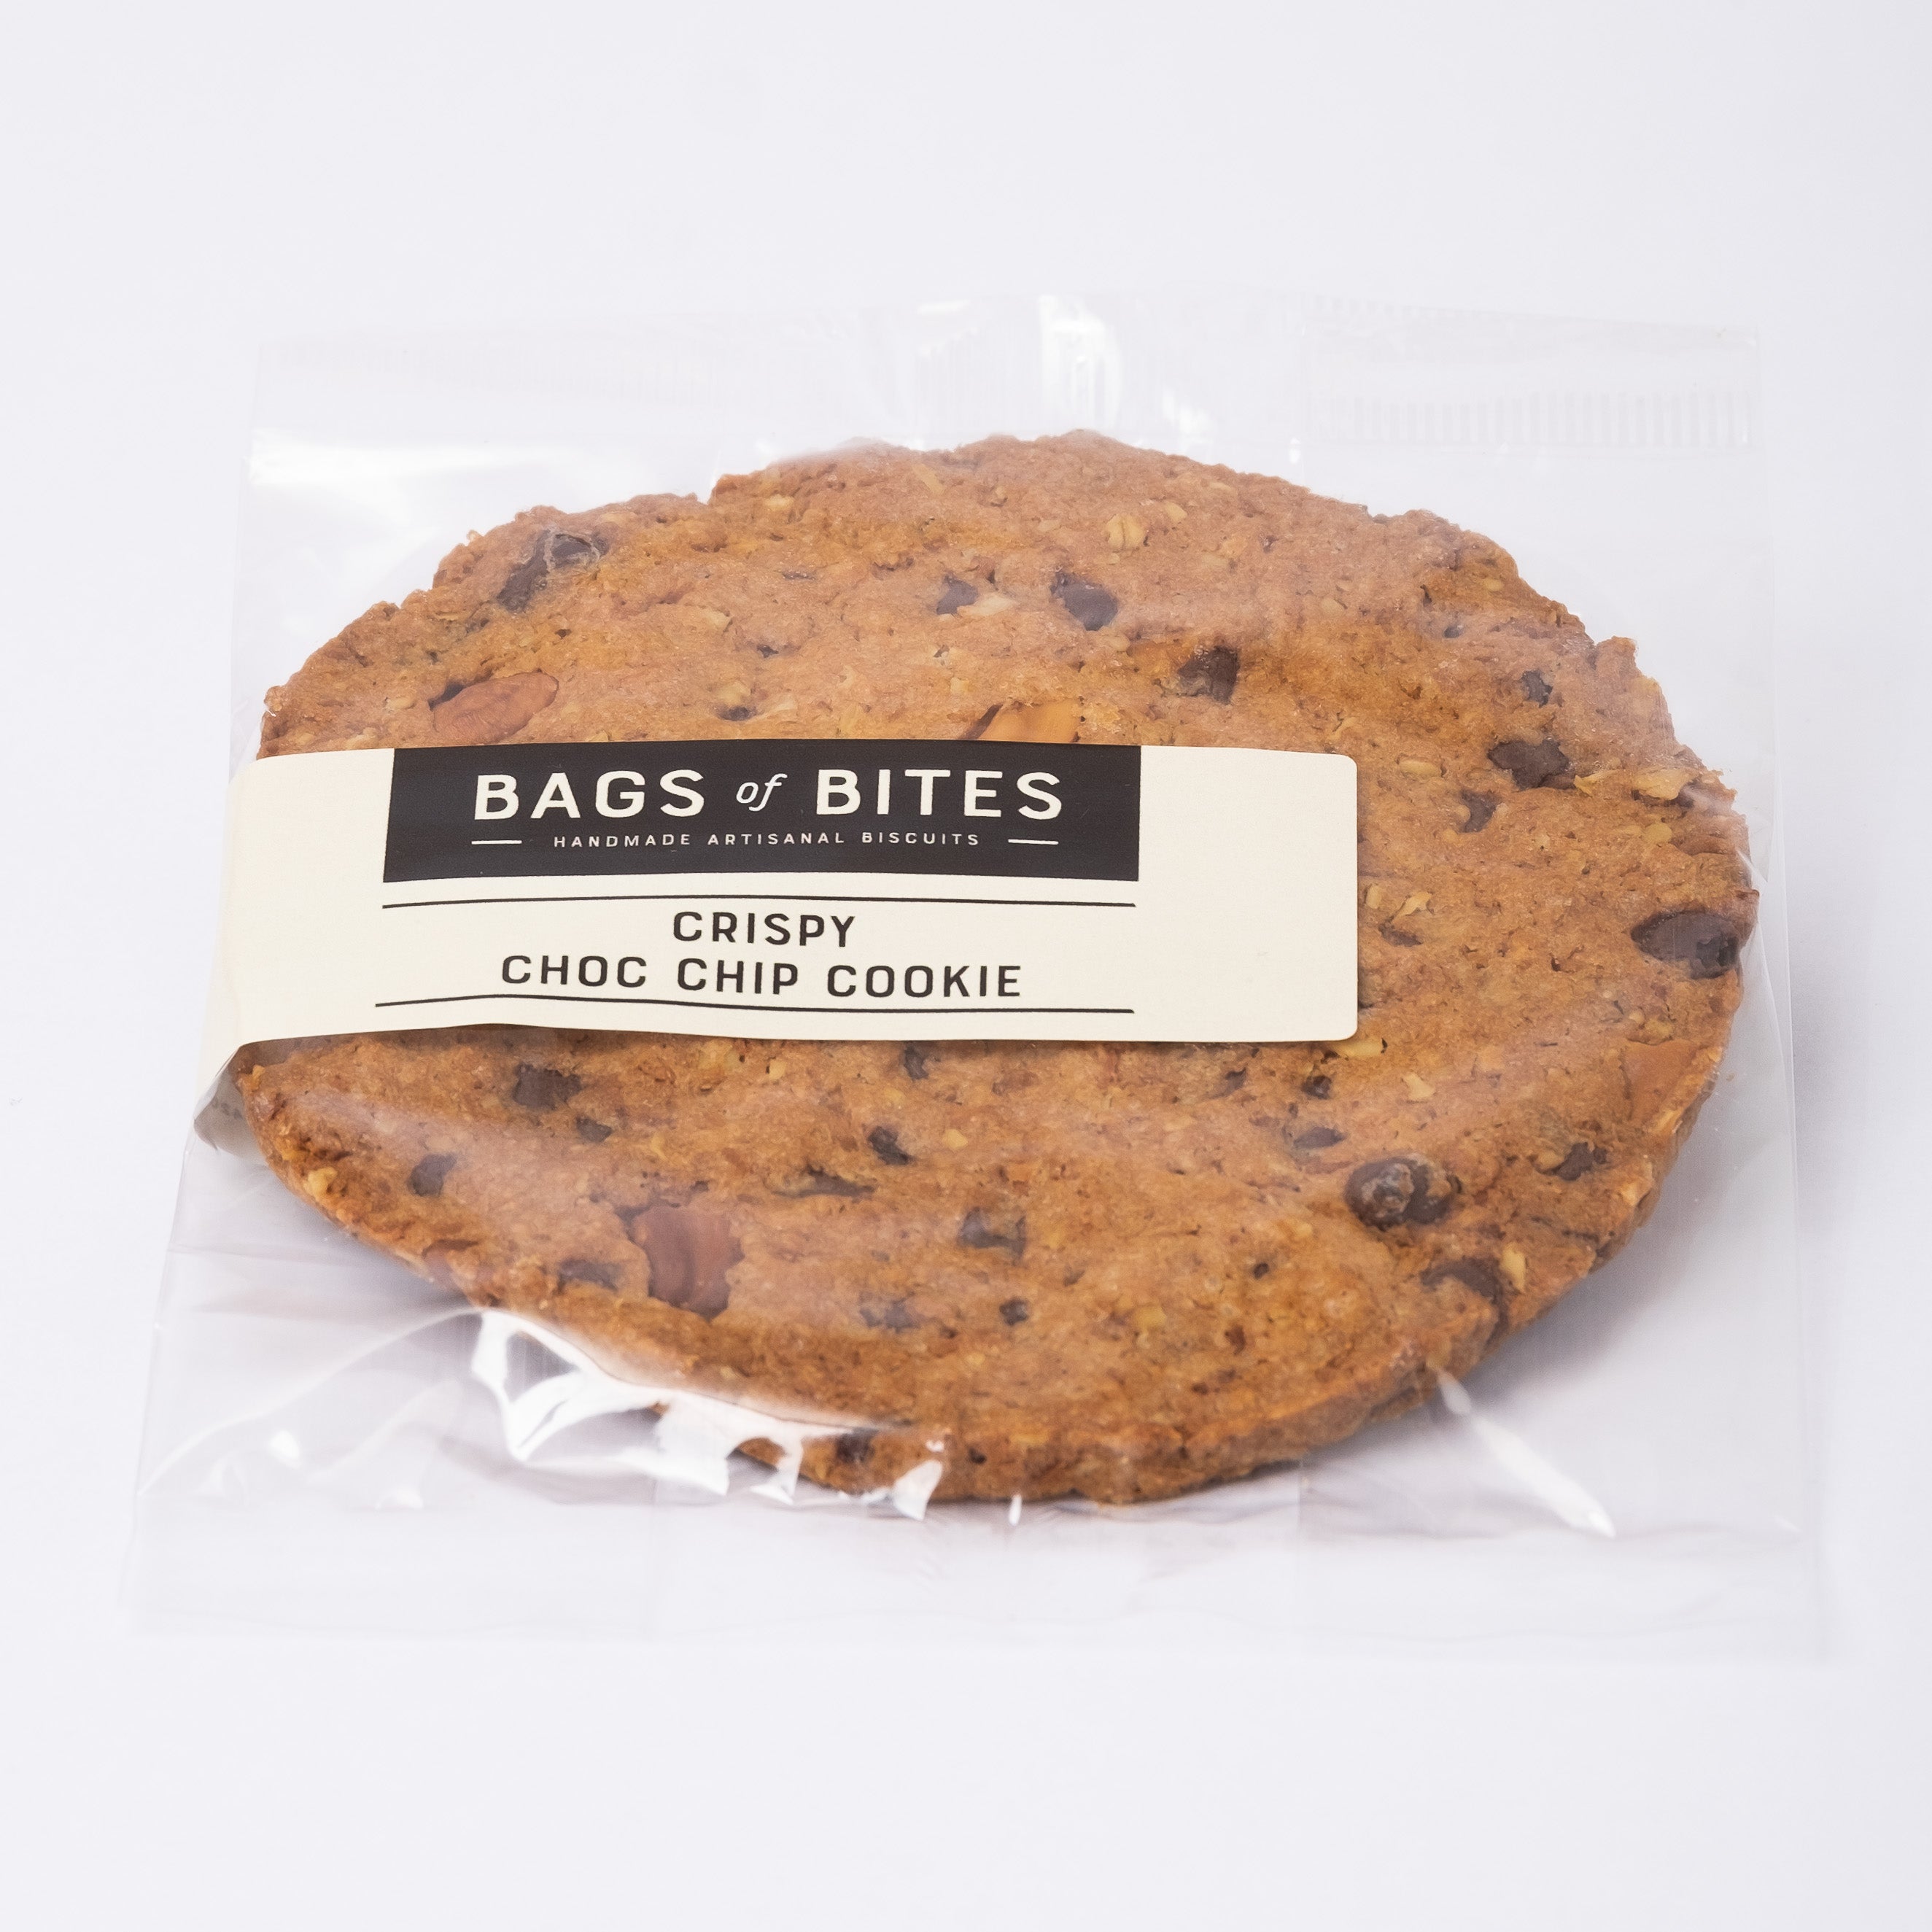 Crispy Choc Chip Cookie - Individually Wrapped